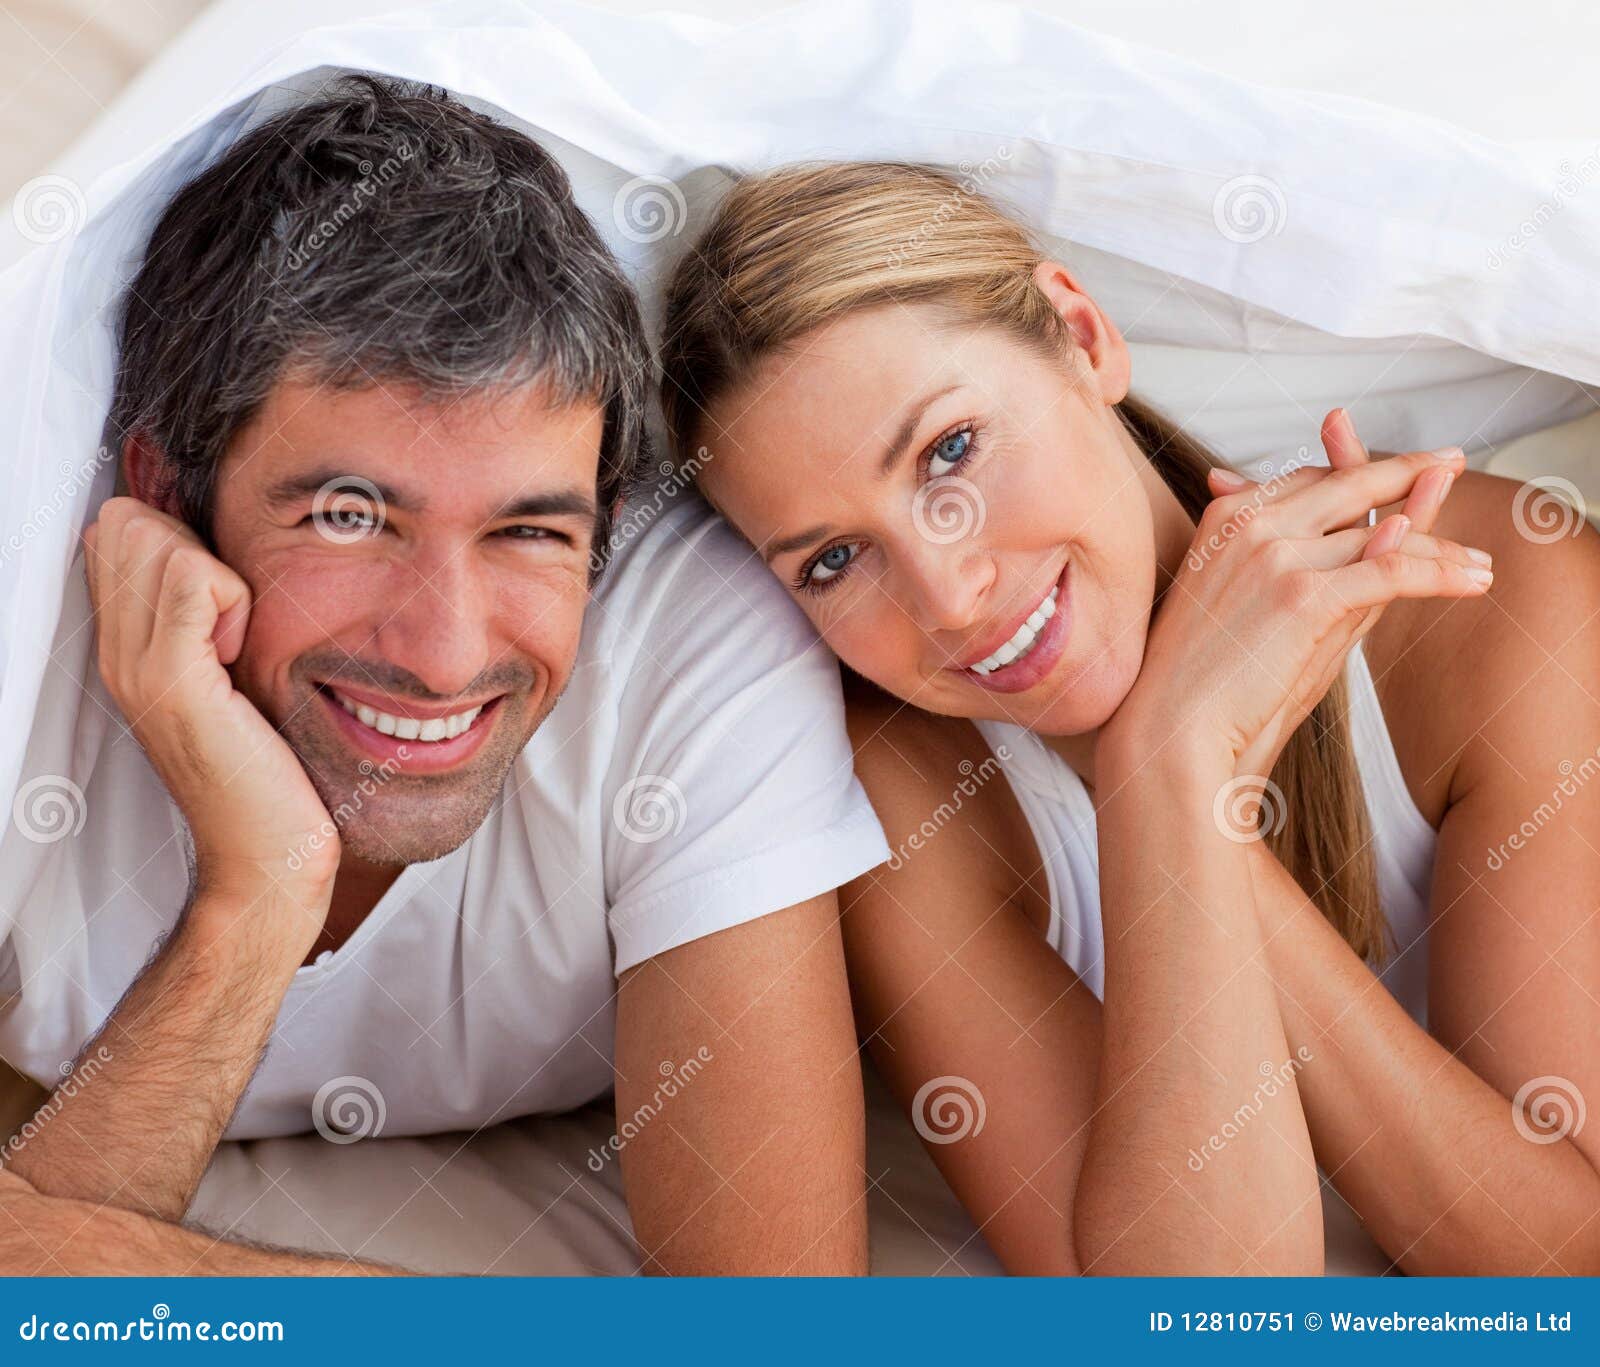 List 95 Pictures Couples Lying In Bed Images Superb 